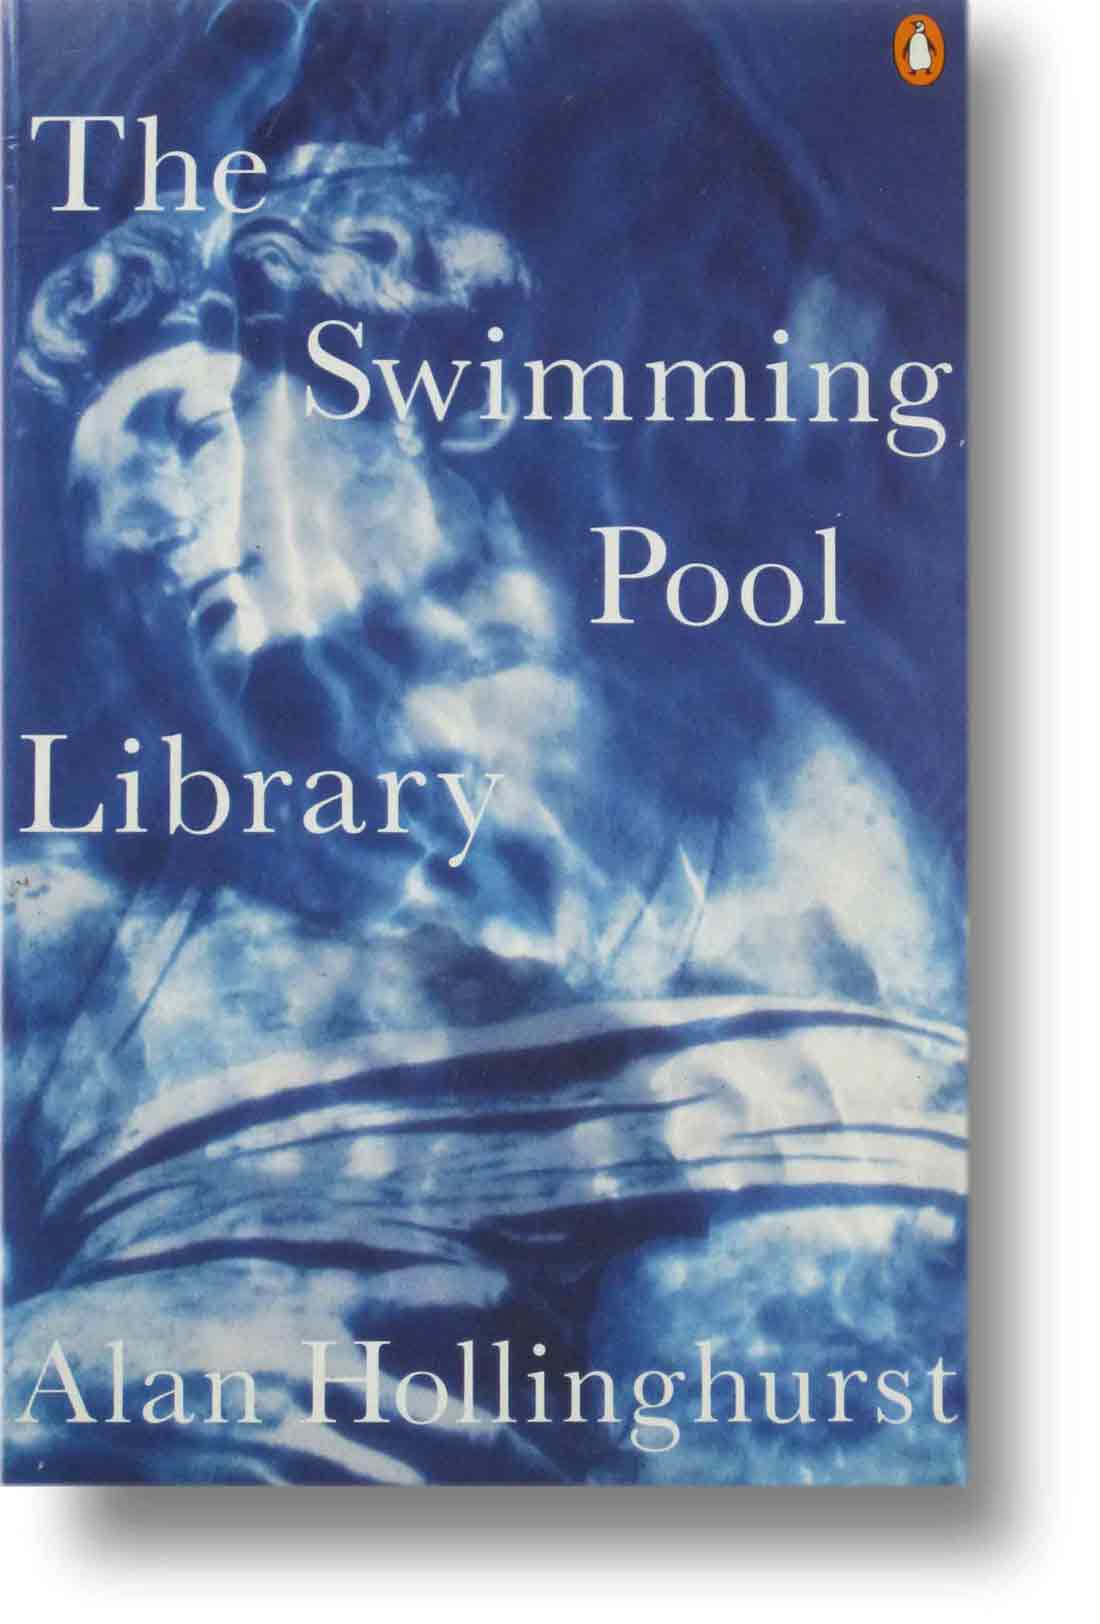 Penguin Books the swimmming pool library by Alan Hollingshurst designed by ideology.uk.com